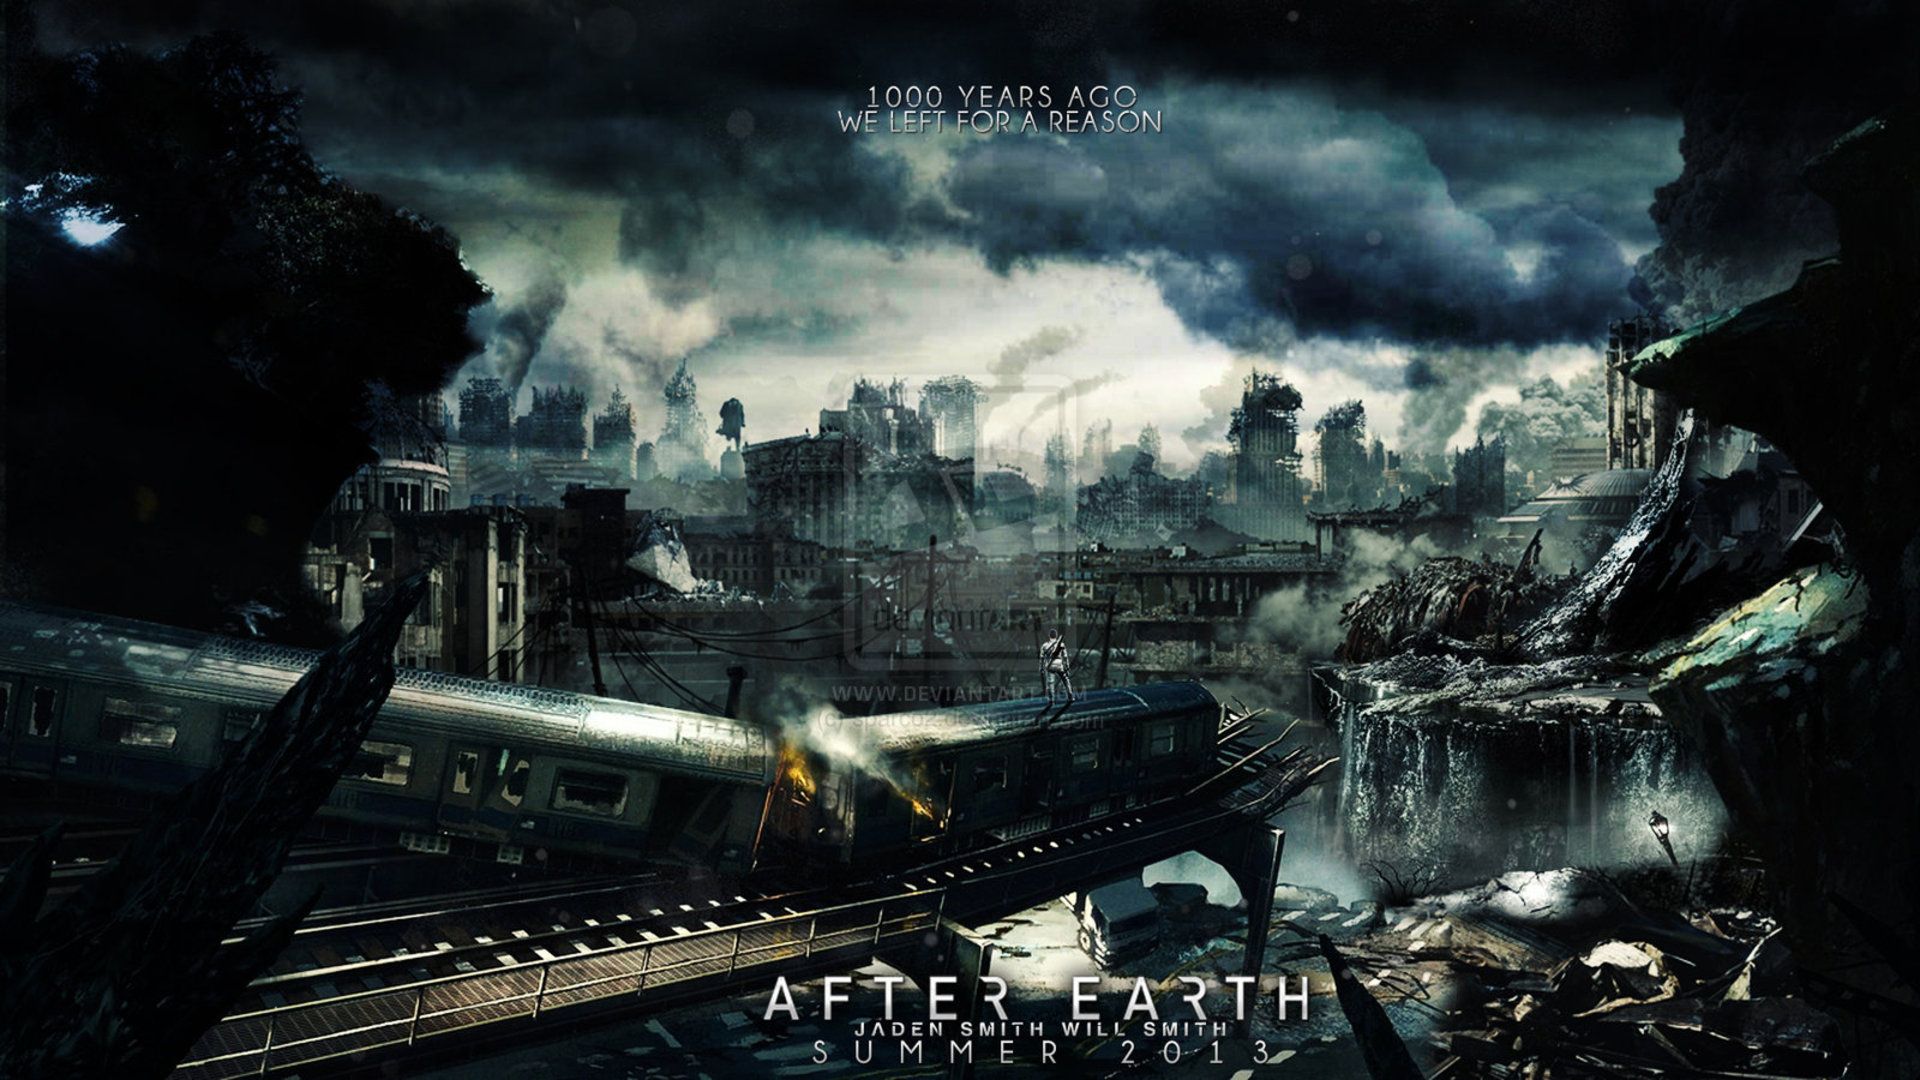 HD wallpaper, 2013, After, Movie, Earth